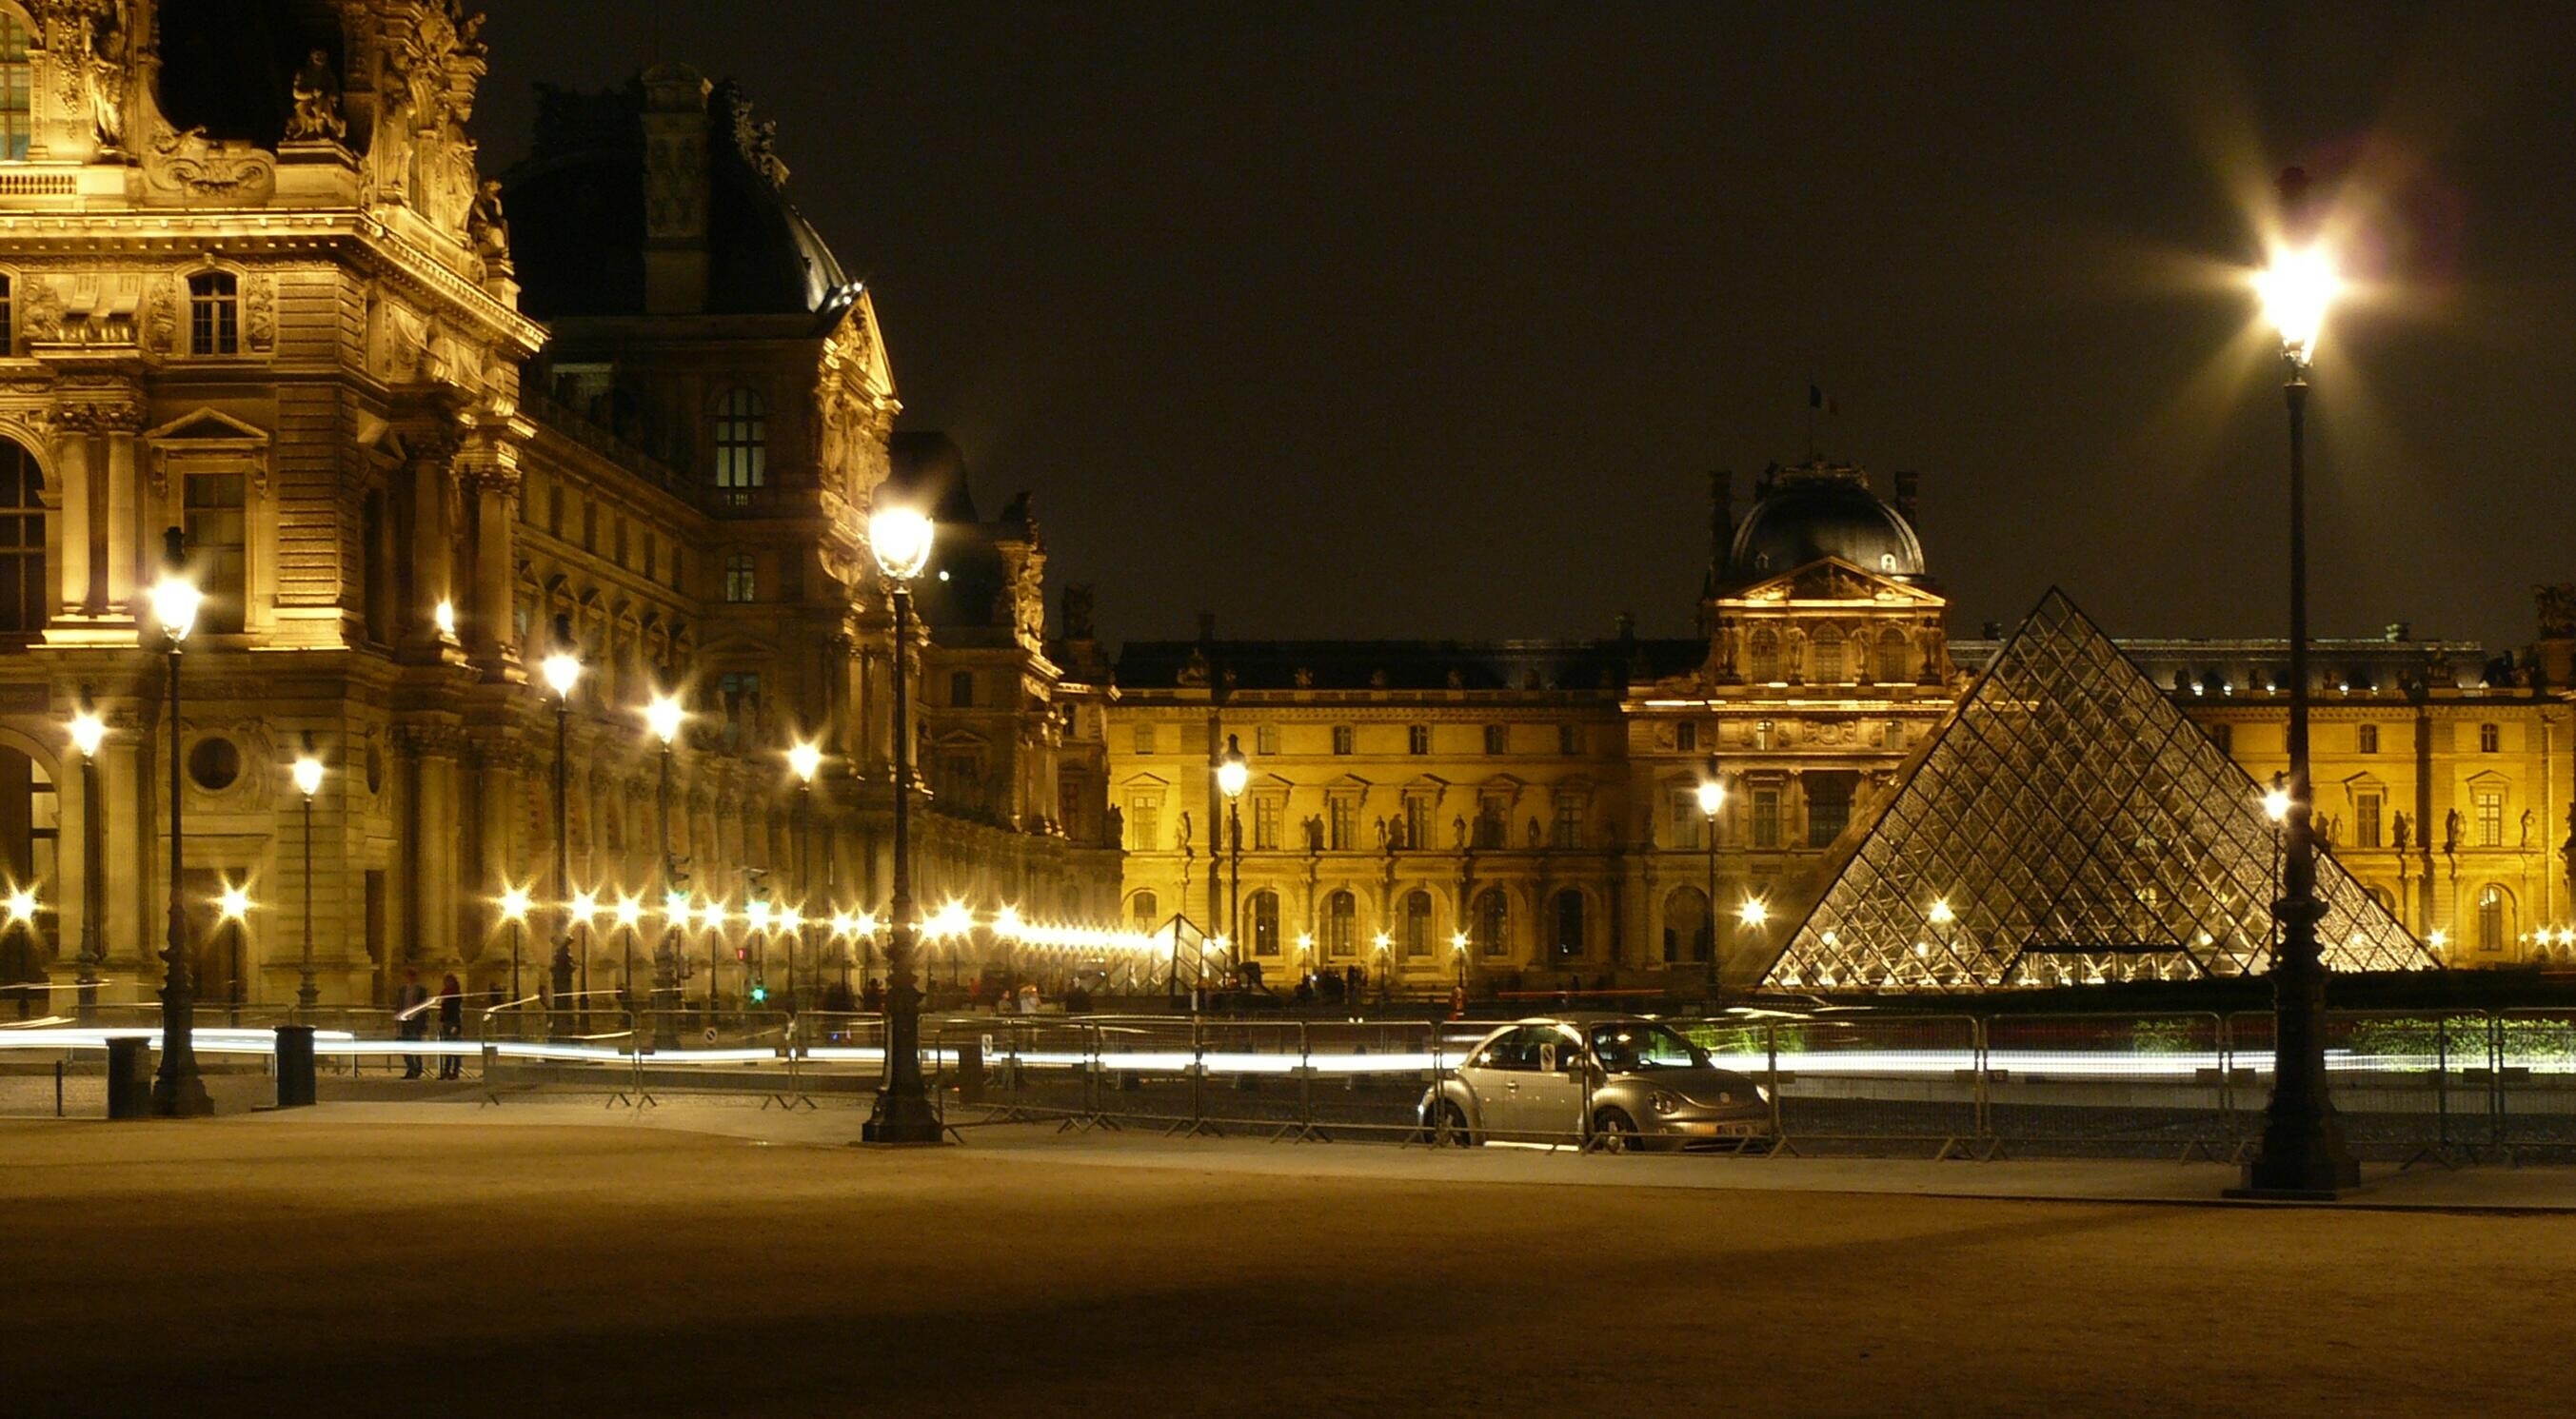 the louvre